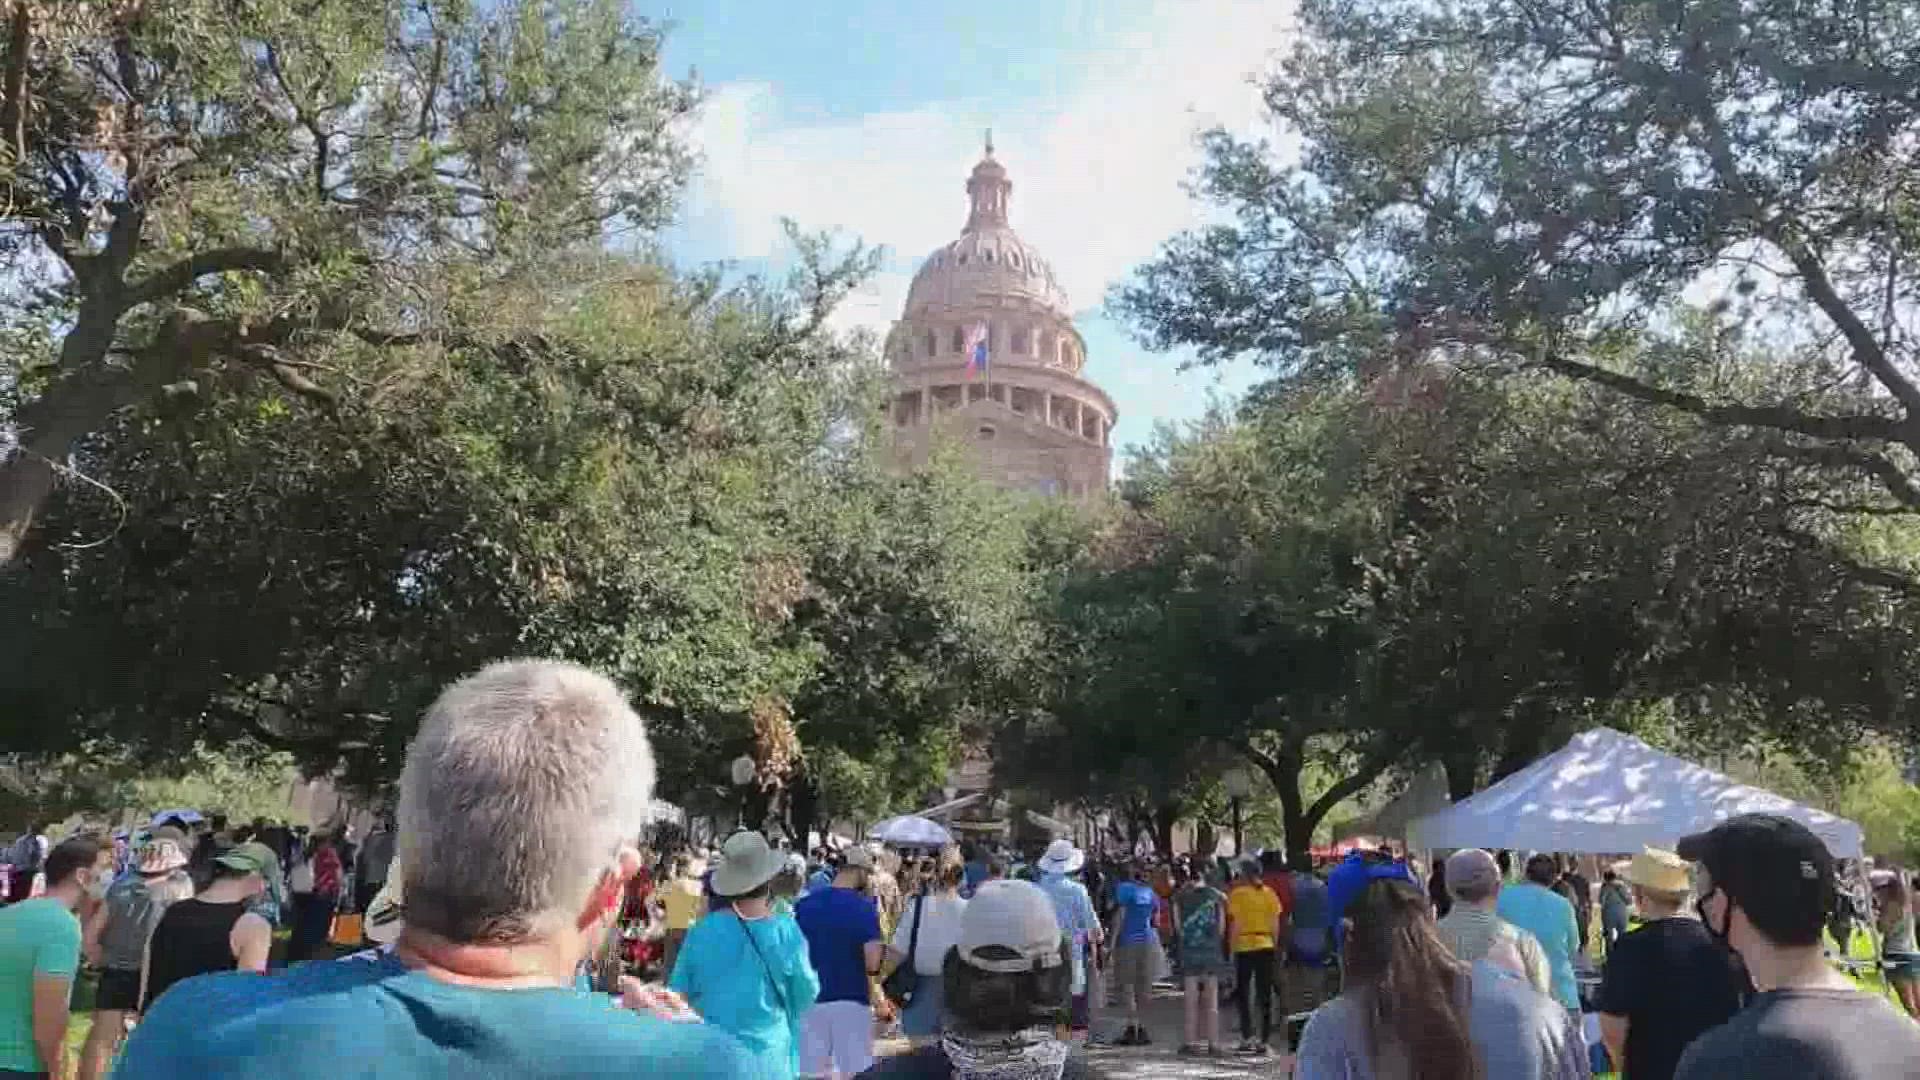 The fight to pass federal voting legislation hit a fever pitch on Saturday at the Texas State Capitol.